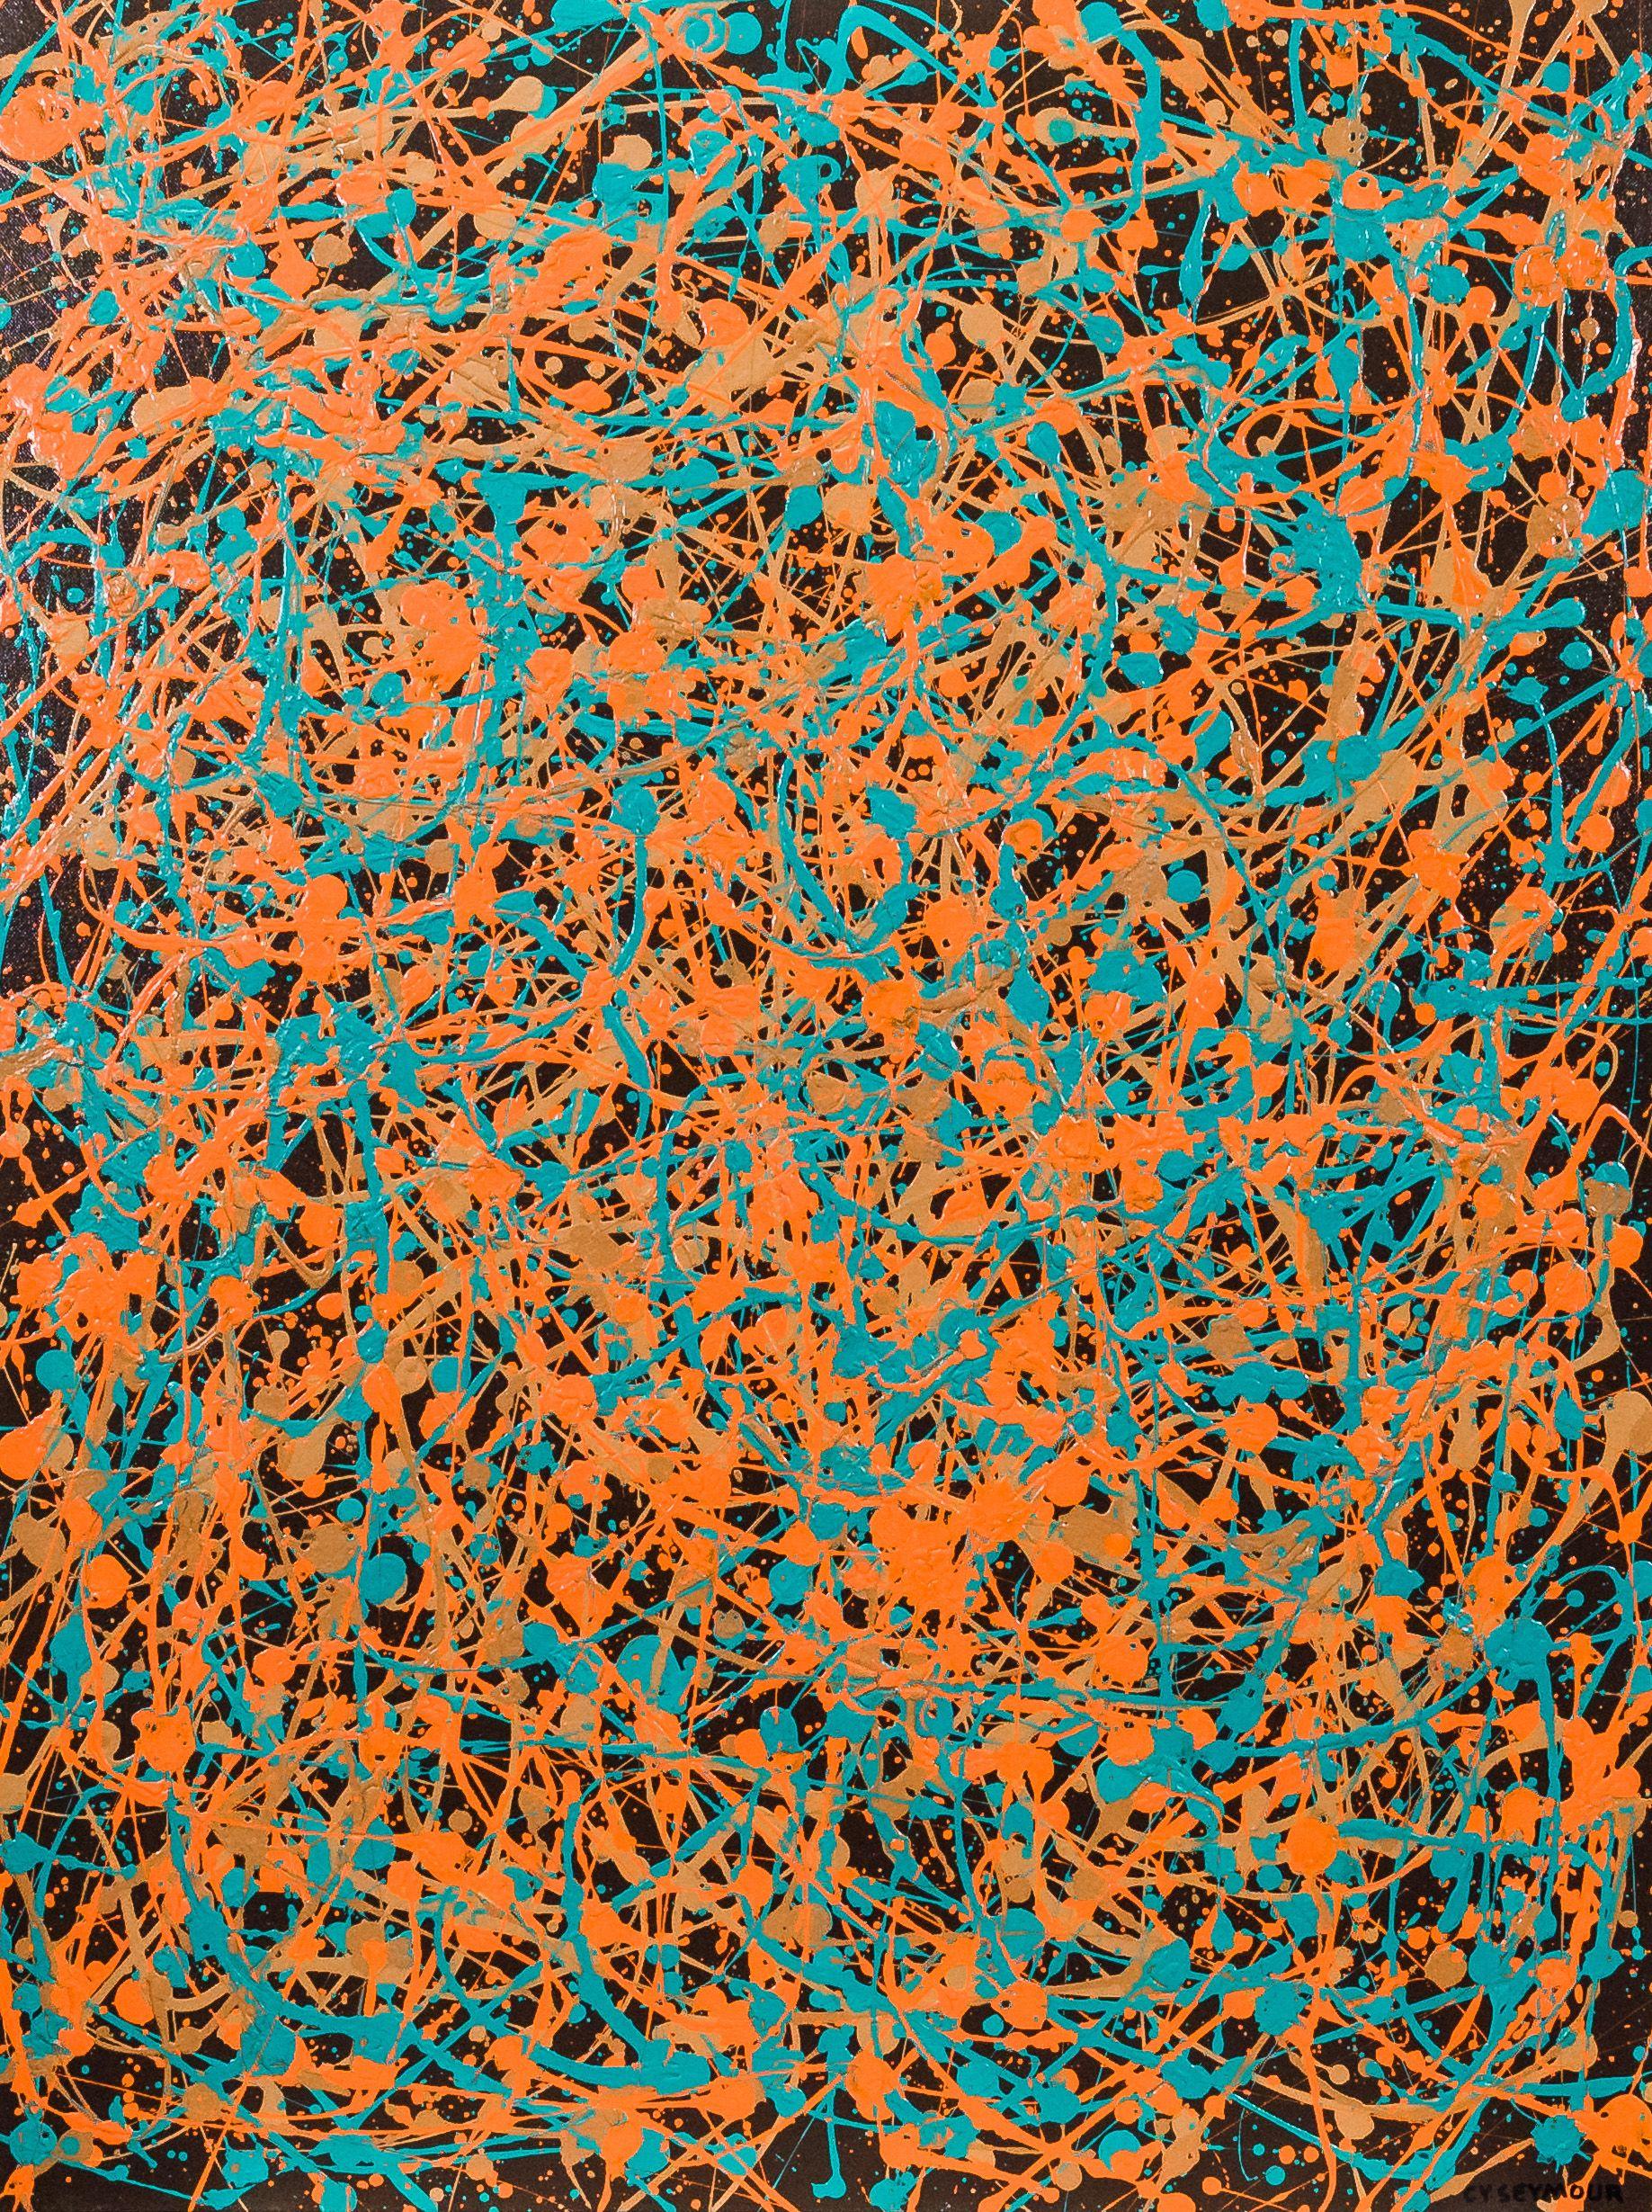 Soft Turquoise, Mandarin Orange, Chocolate Brown on Black.  Can be presented horizontally or vertically. :: Painting :: Abstract Expressionism :: This piece comes with an official certificate of authenticity signed by the artist :: Ready to Hang: